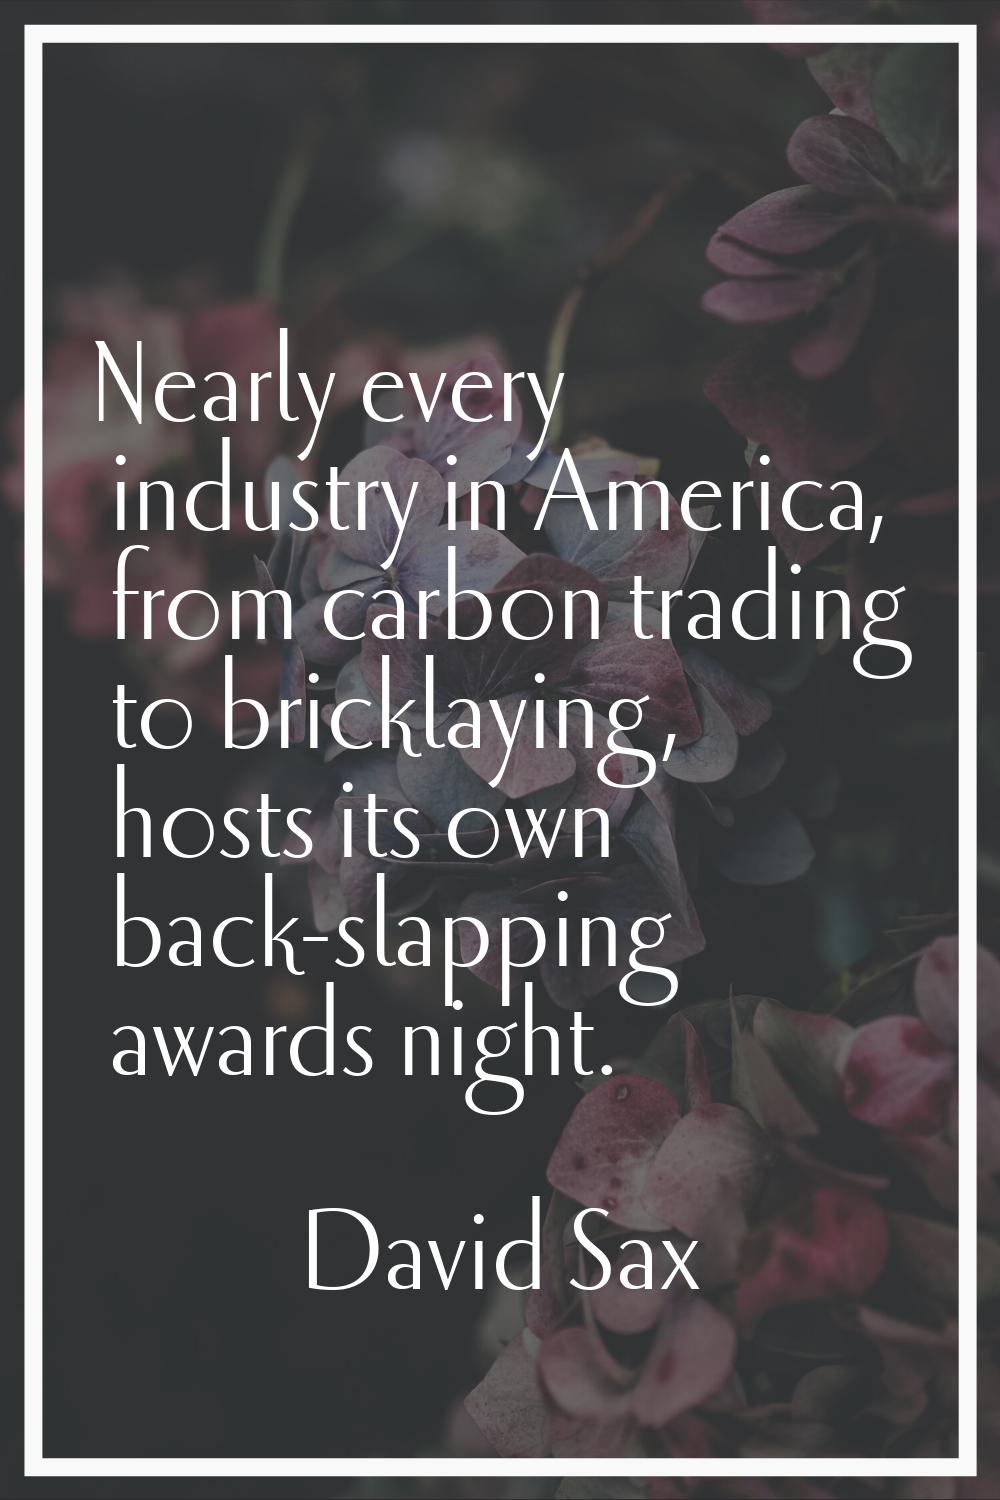 Nearly every industry in America, from carbon trading to bricklaying, hosts its own back-slapping a